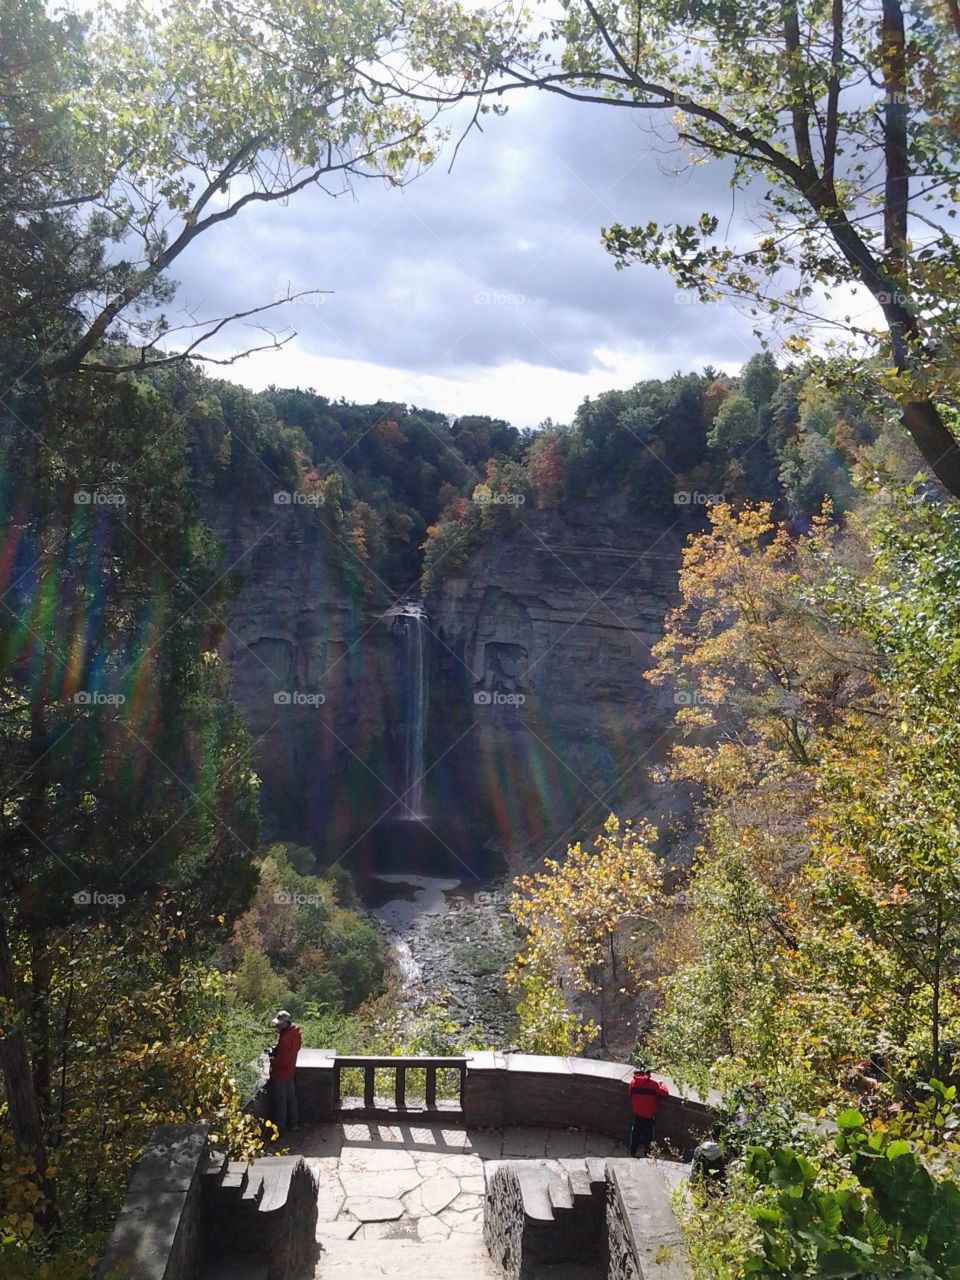 Taughannock Falls, Ithaca, NY. Taken in early autumn.